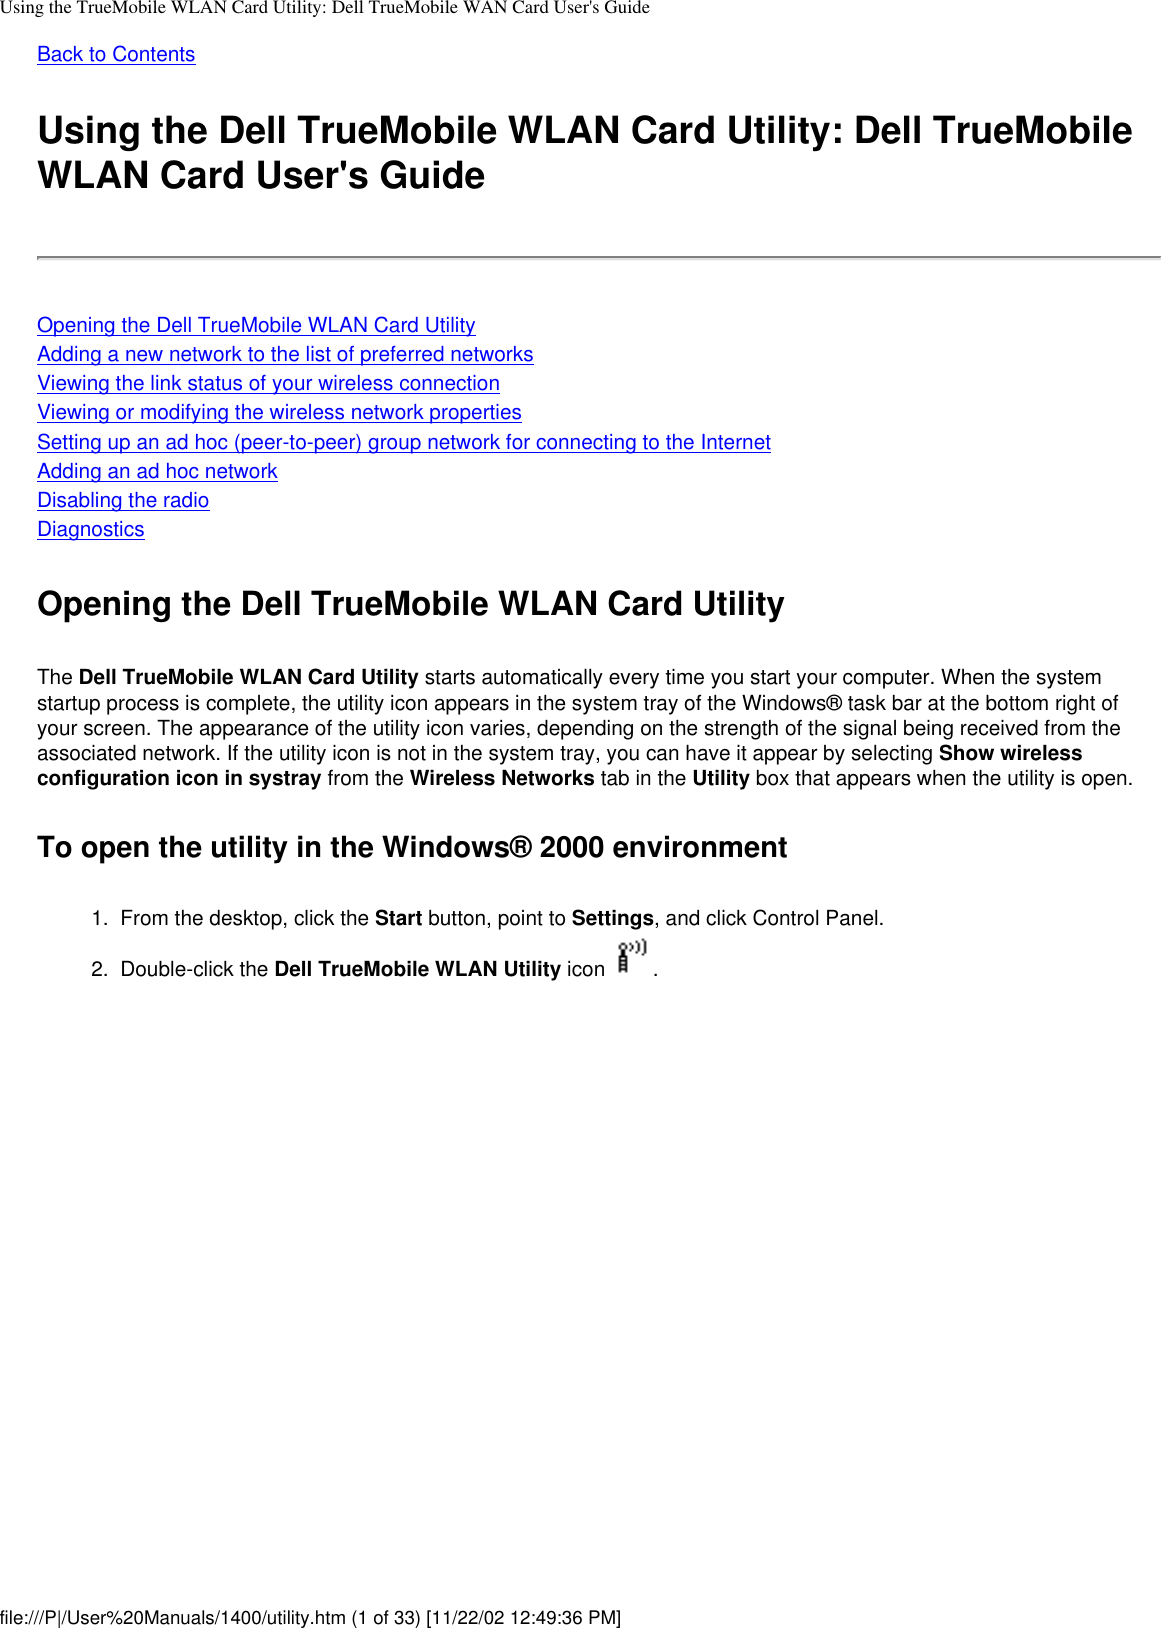 Using the TrueMobile WLAN Card Utility: Dell TrueMobile WAN Card User&apos;s GuideBack to ContentsUsing the Dell TrueMobile WLAN Card Utility: Dell TrueMobile WLAN Card User&apos;s GuideOpening the Dell TrueMobile WLAN Card UtilityAdding a new network to the list of preferred networksViewing the link status of your wireless connectionViewing or modifying the wireless network propertiesSetting up an ad hoc (peer-to-peer) group network for connecting to the InternetAdding an ad hoc networkDisabling the radioDiagnosticsOpening the Dell TrueMobile WLAN Card UtilityThe Dell TrueMobile WLAN Card Utility starts automatically every time you start your computer. When the system startup process is complete, the utility icon appears in the system tray of the Windows® task bar at the bottom right of your screen. The appearance of the utility icon varies, depending on the strength of the signal being received from the associated network. If the utility icon is not in the system tray, you can have it appear by selecting Show wireless configuration icon in systray from the Wireless Networks tab in the Utility box that appears when the utility is open.To open the utility in the Windows® 2000 environment1.  From the desktop, click the Start button, point to Settings, and click Control Panel.2.  Double-click the Dell TrueMobile WLAN Utility icon  . file:///P|/User%20Manuals/1400/utility.htm (1 of 33) [11/22/02 12:49:36 PM]